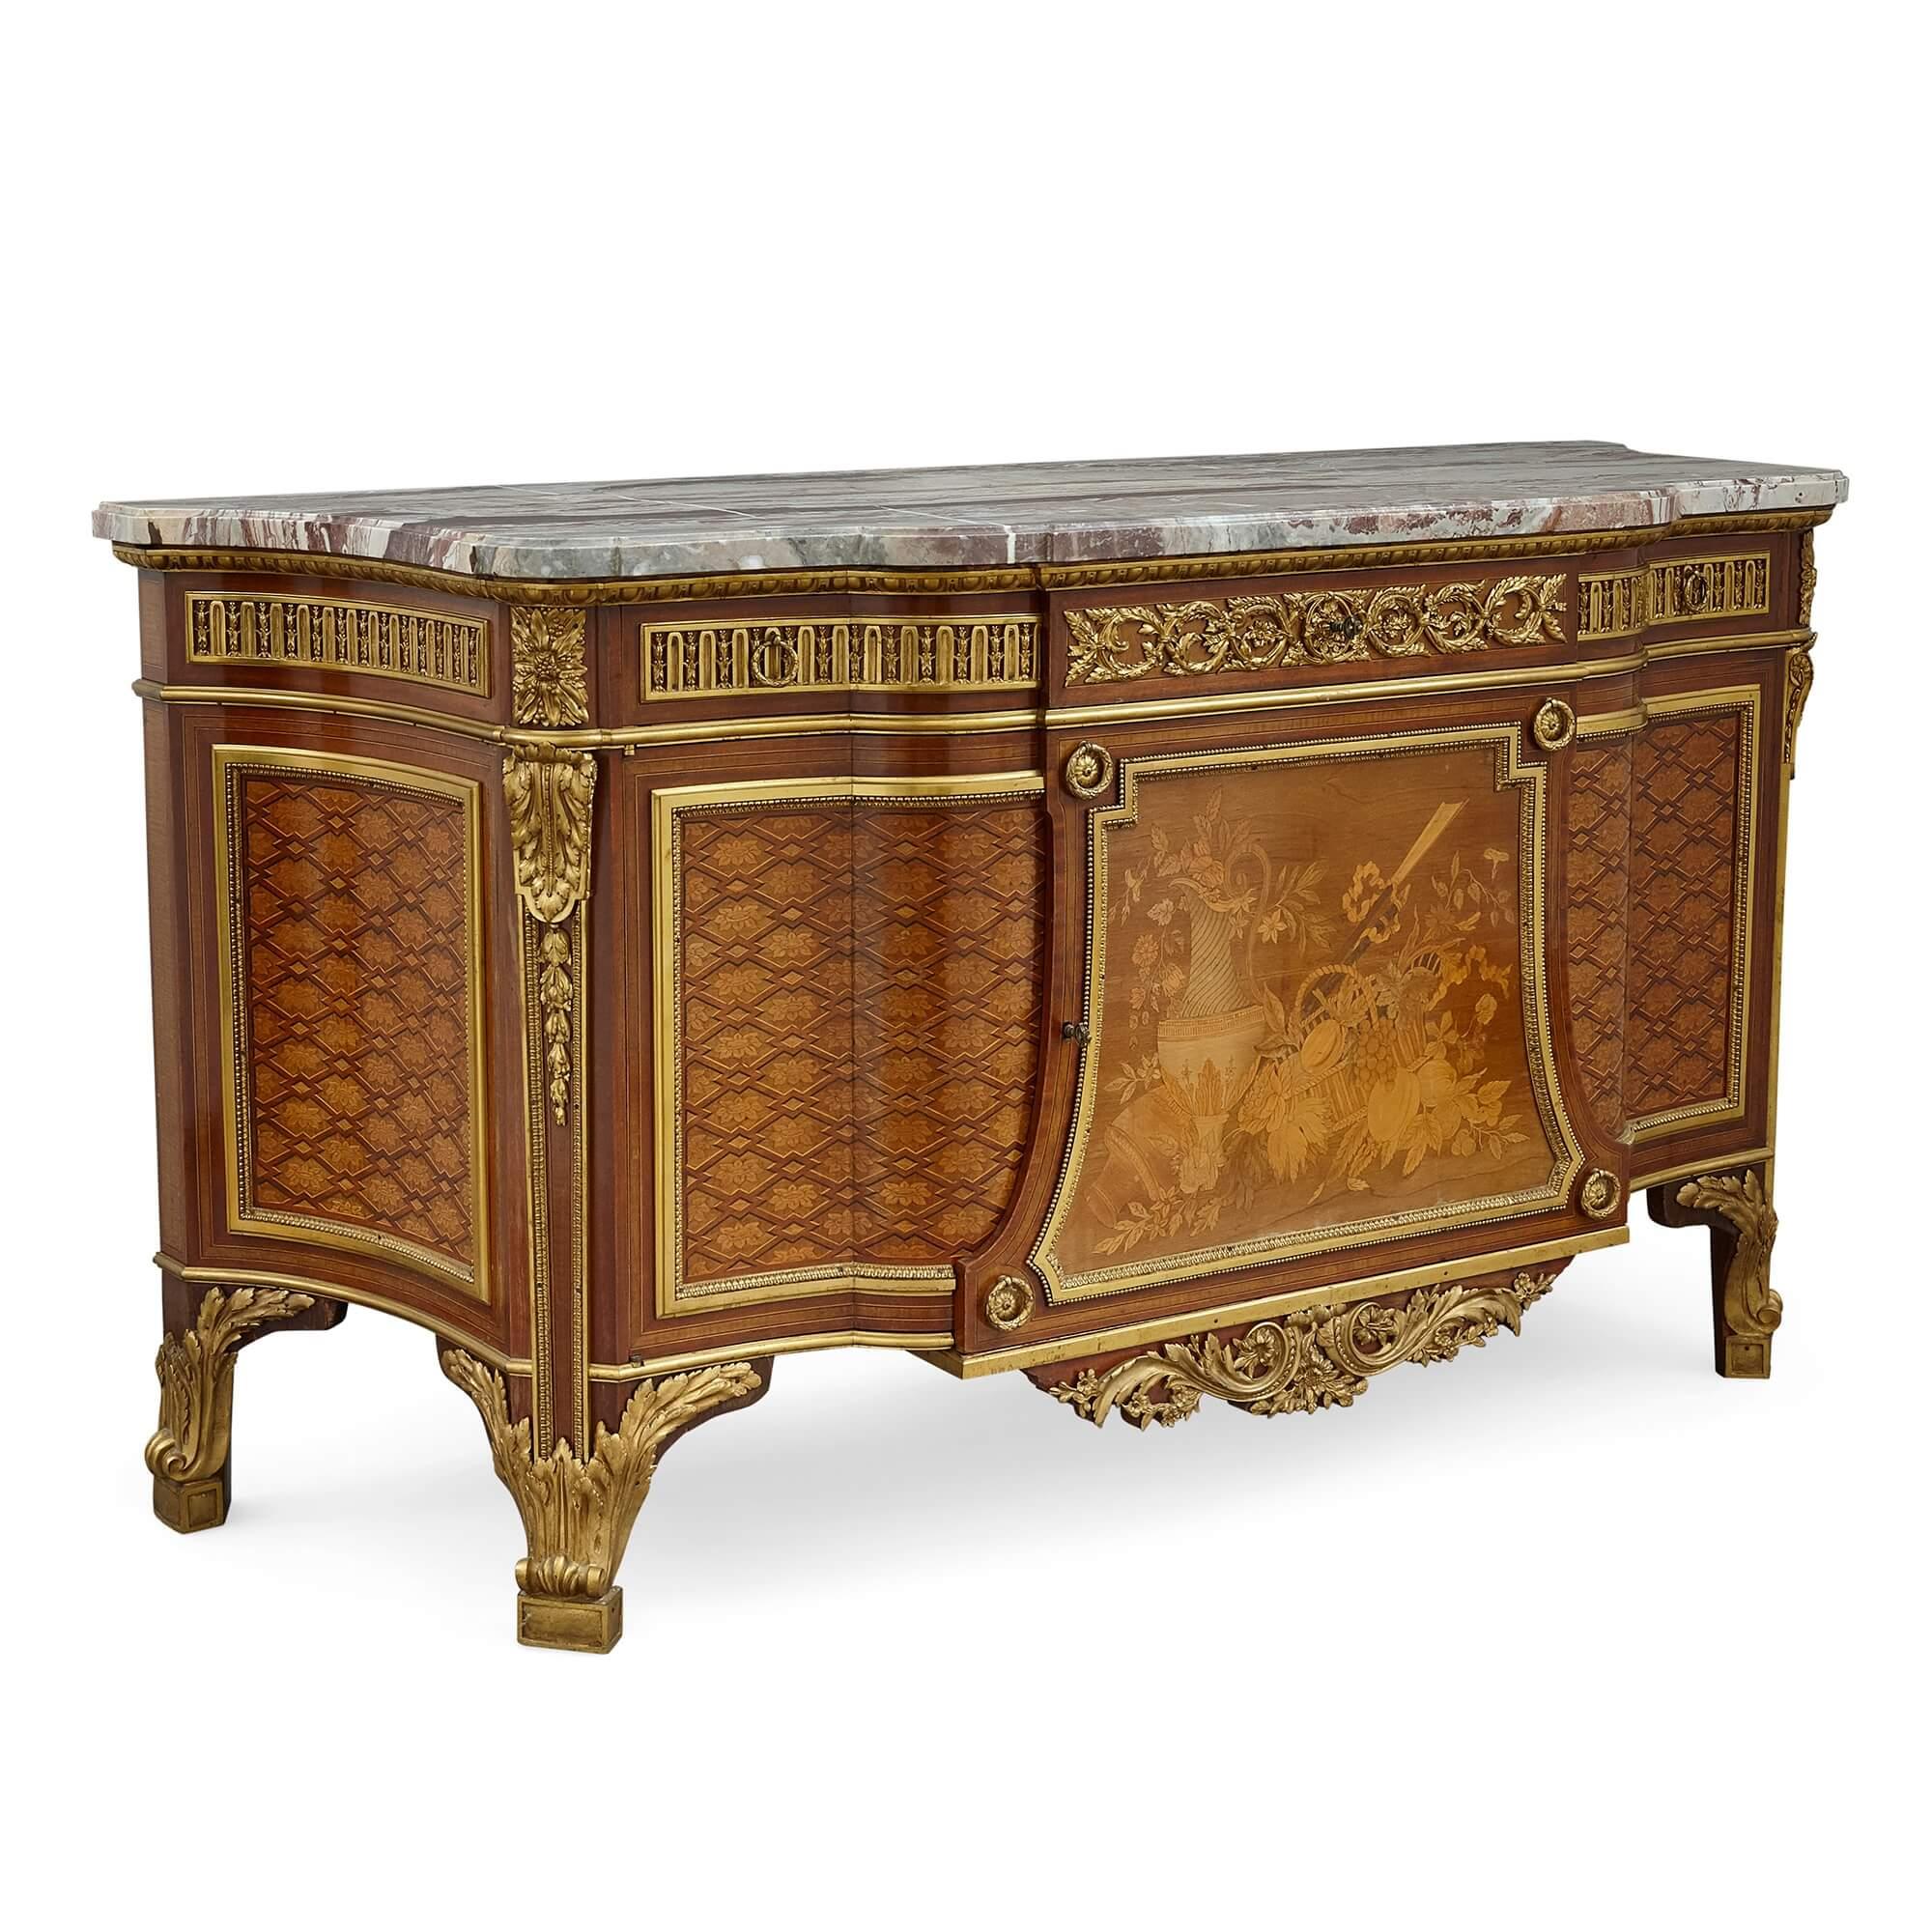 Marble topped marquetry commode after Riesener
French, late 19th Century
Measures: Height 91cm, width 173cm, depth 64cm

This exquisite commode takes after a commode made by the master of 18th Century furniture, Jean-Henri Riesener, which is